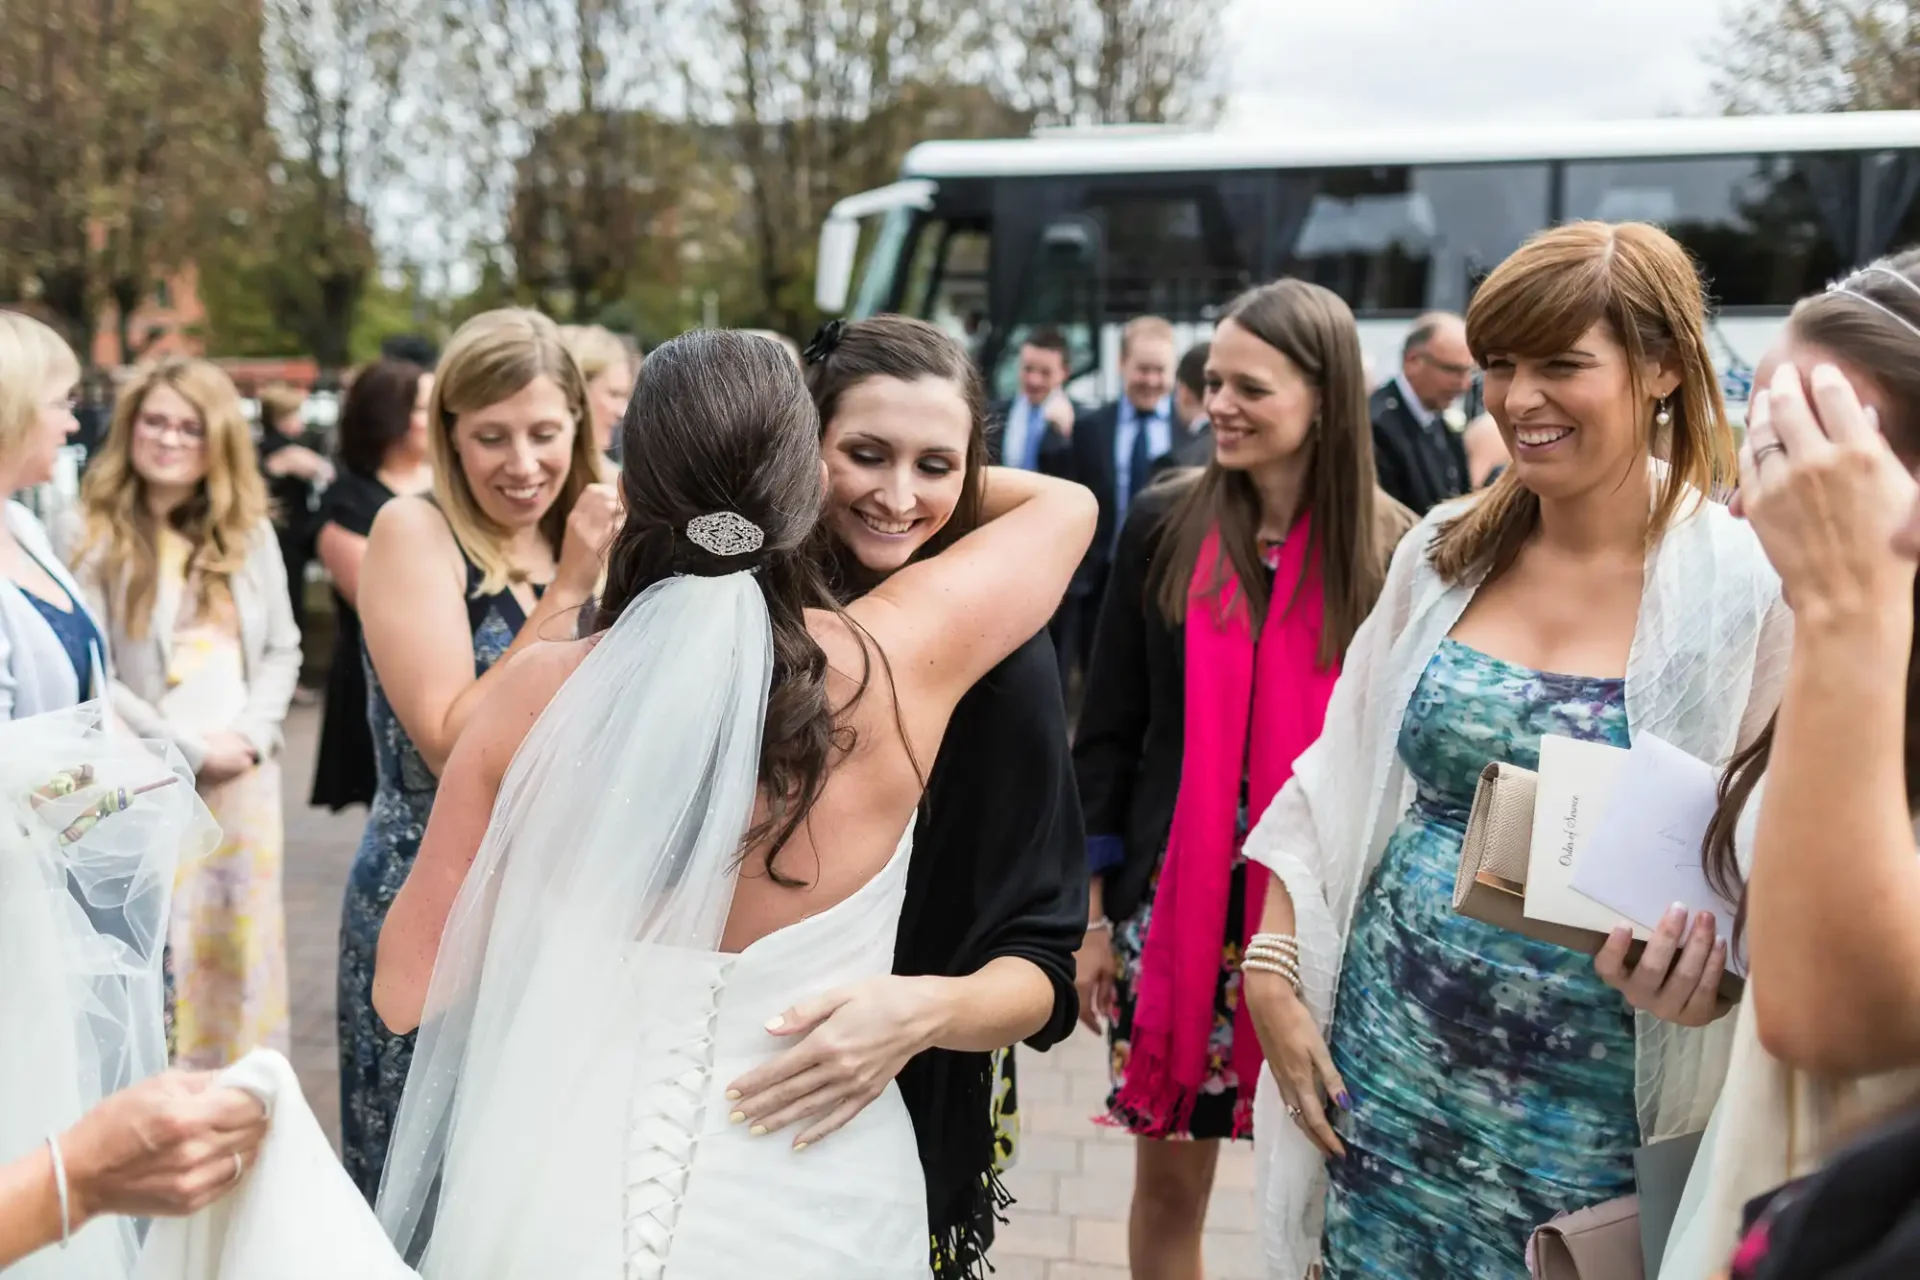 A bride embraces a guest at her wedding, surrounded by smiling female friends and family outdoors.